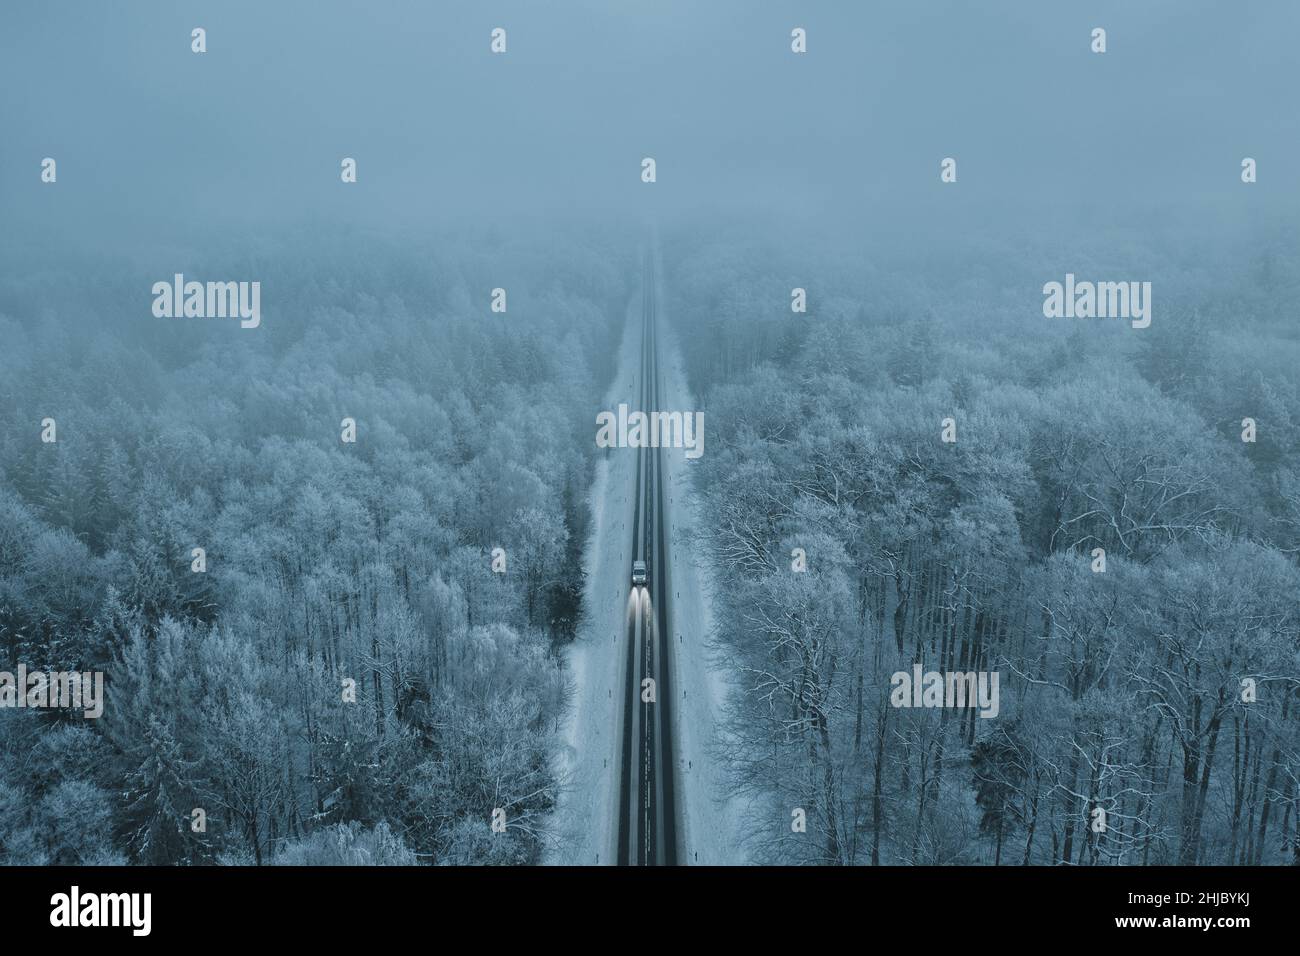 High angle view of a car on the road trough the winter forest with copy space Stock Photo